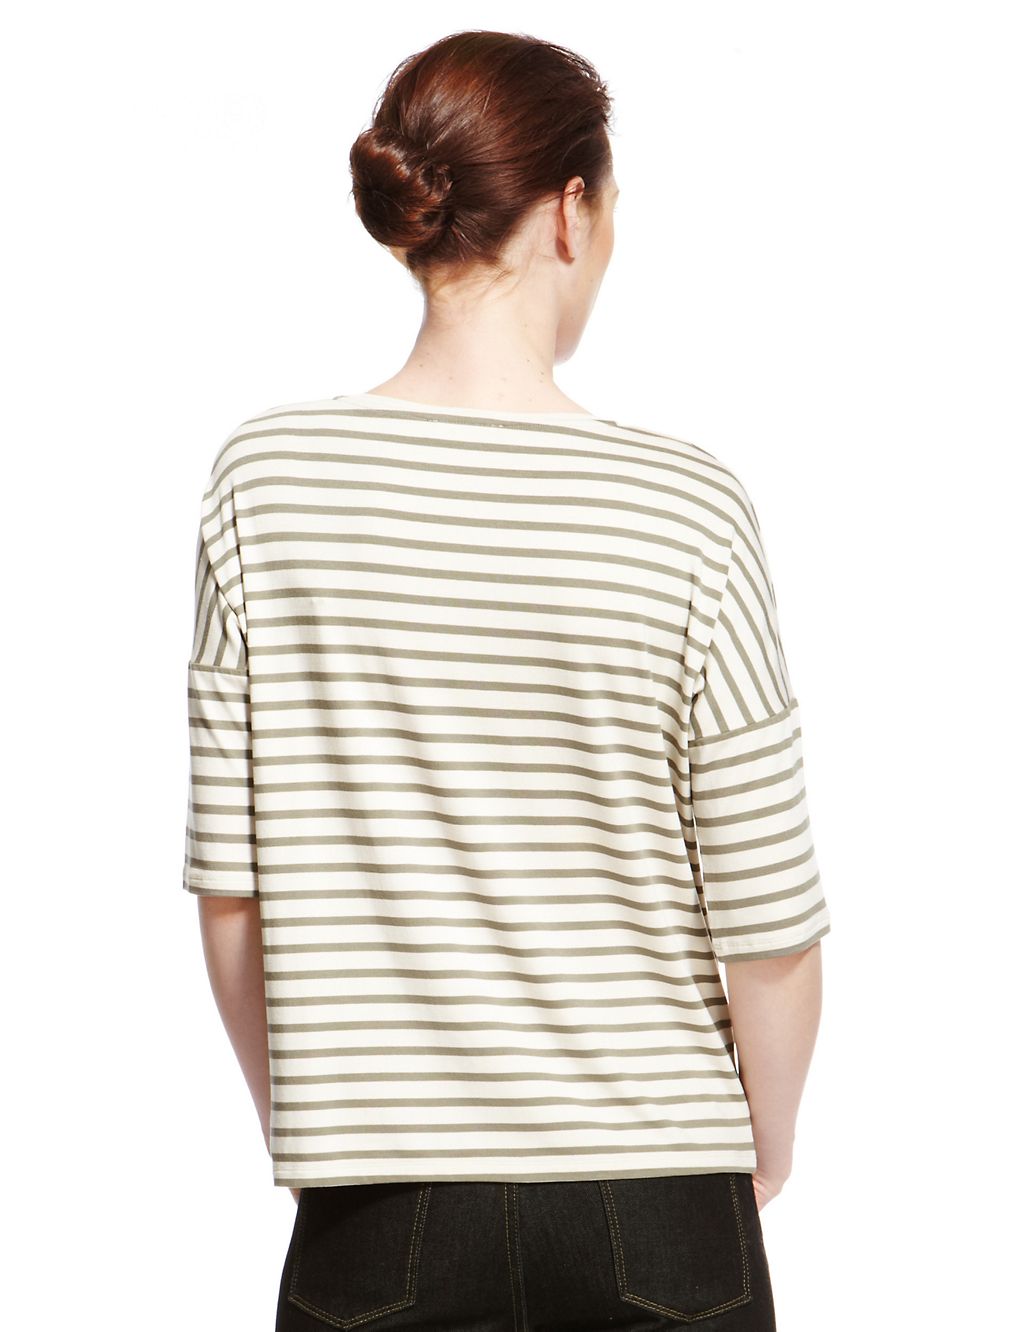 Boxy Striped Top 4 of 4